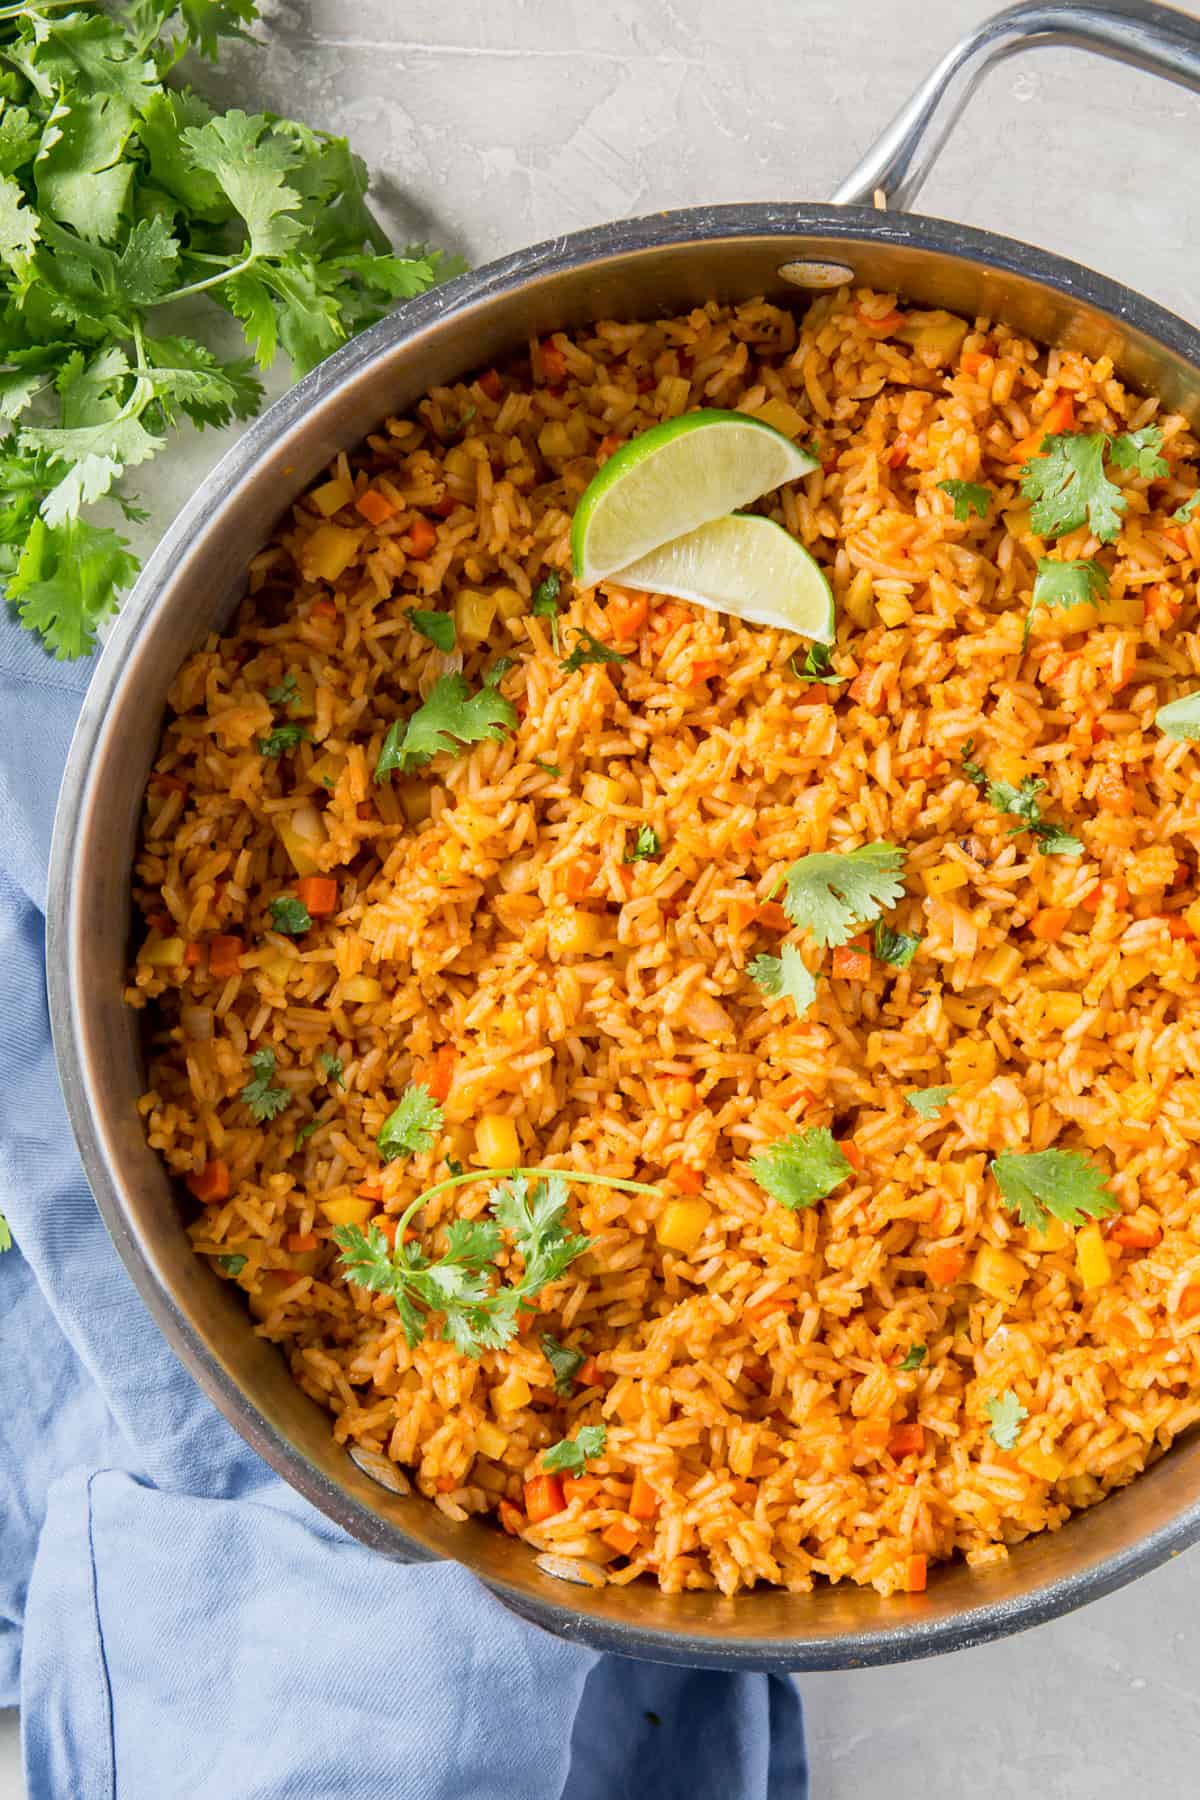 Orange Mexican rice in a pot.